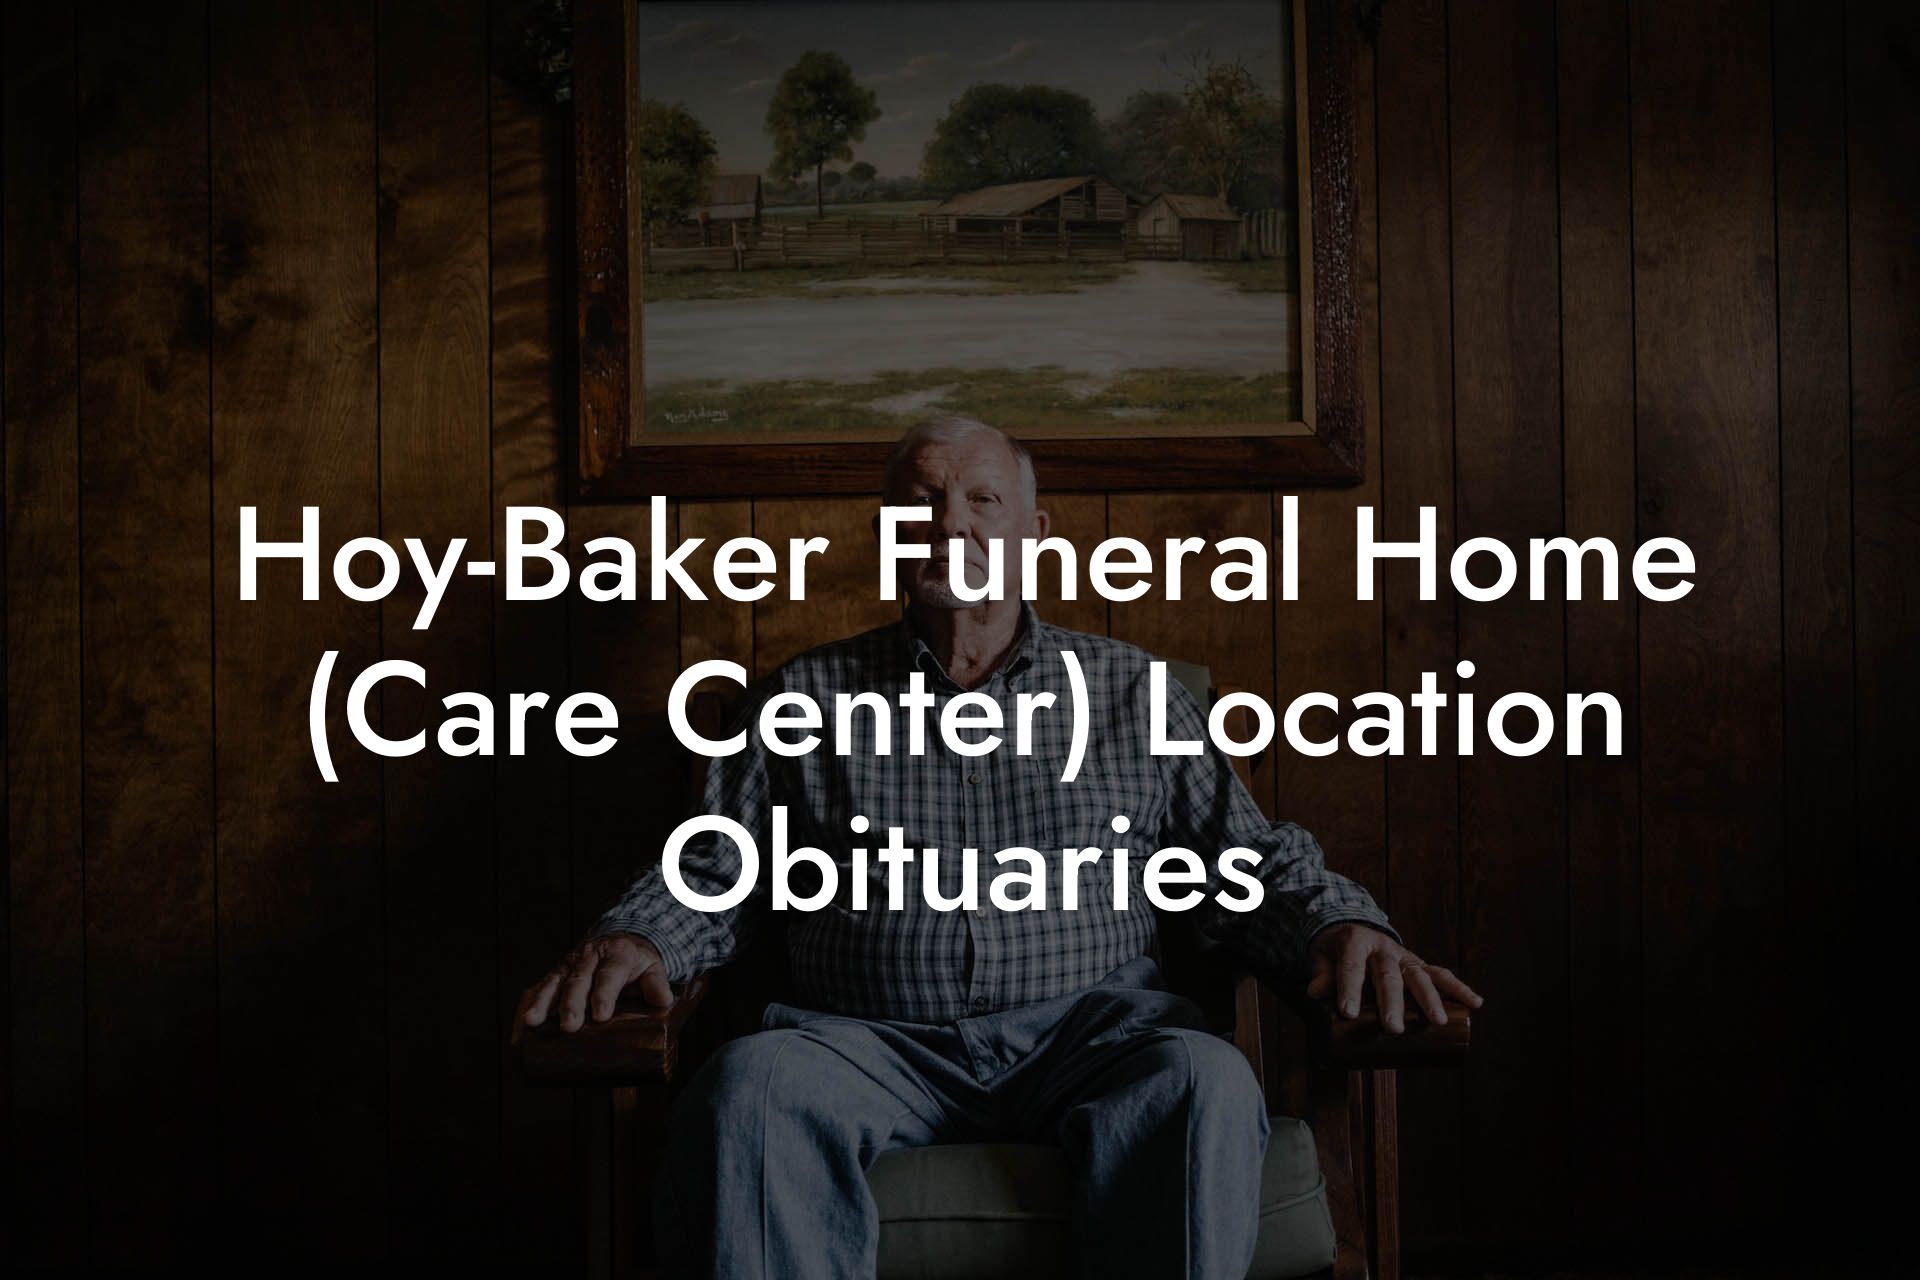 Hoy-Baker Funeral Home (Care Center) Location Obituaries